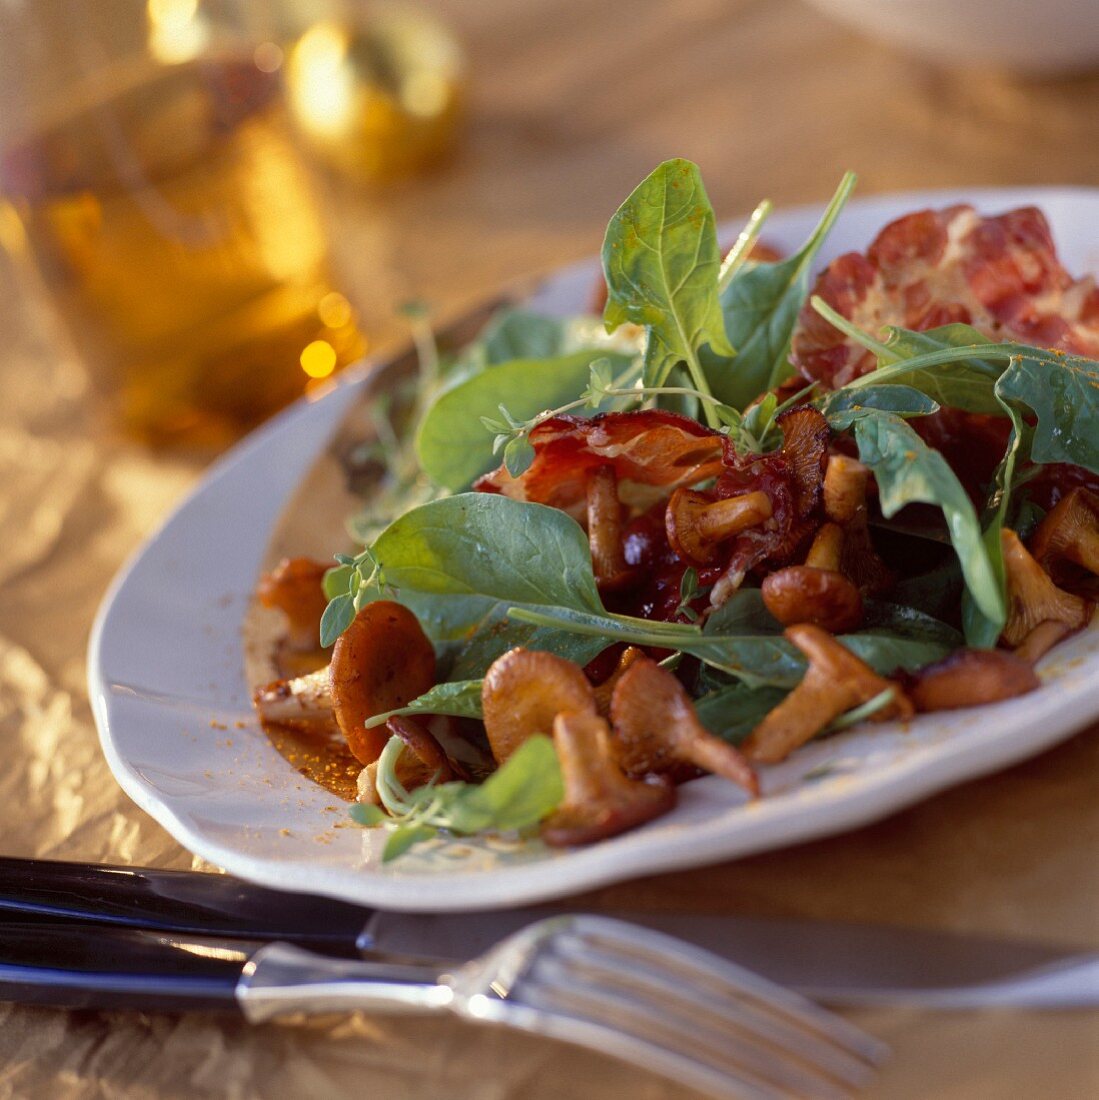 Chanterelle salad with spinach leaves and grilled coppa